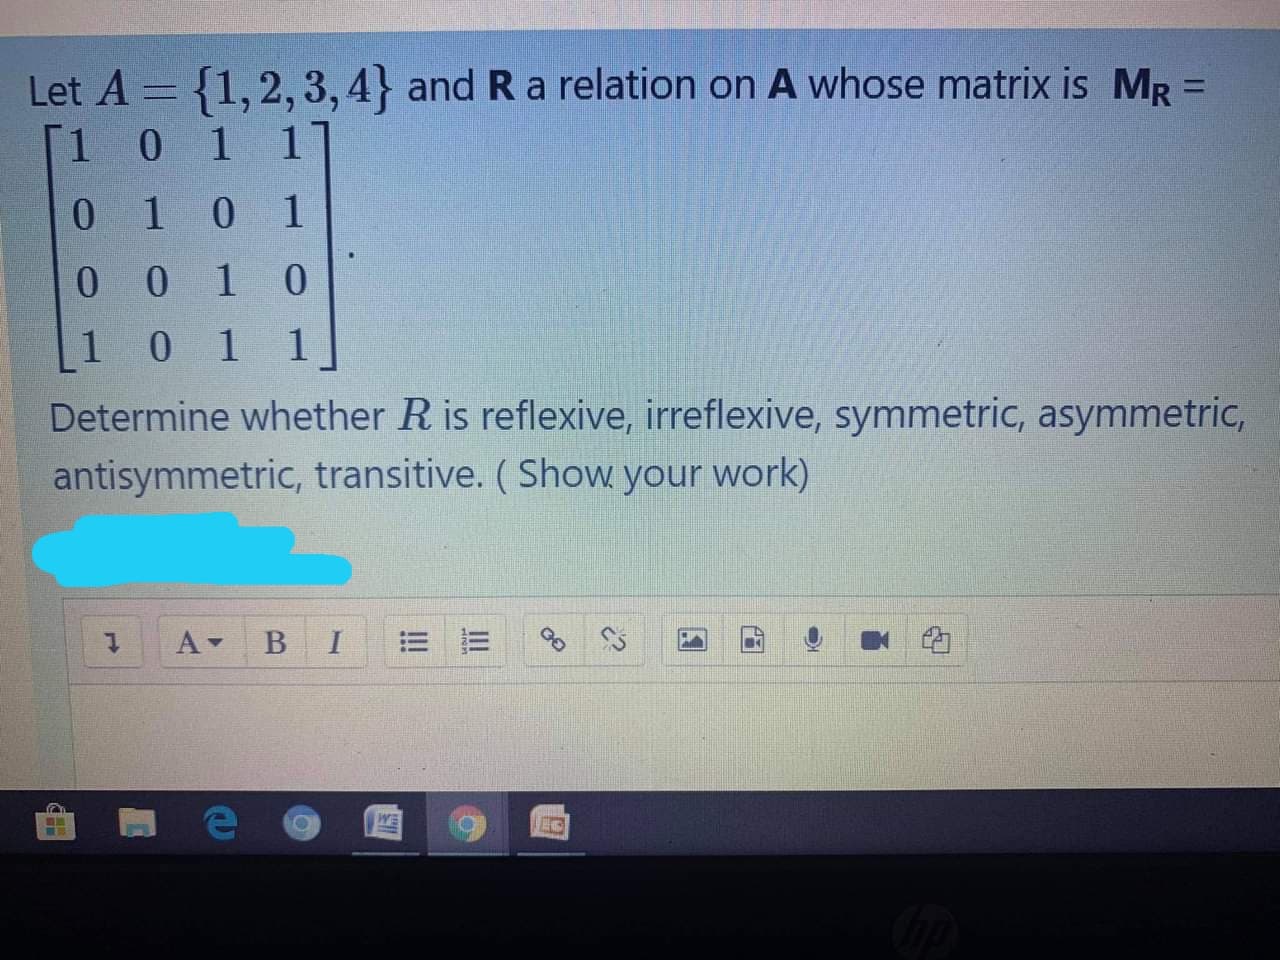 Let A = {1,2, 3,4} and R a relation on A whose matrix is MR =
[1 0 1 1
%3D
0 10 1
0 0 1 0
10 1
1 1
Determine whether R is reflexive, irreflexive, symmetric, asymmetric,
antisymmetric, transitive. (Show your work)
